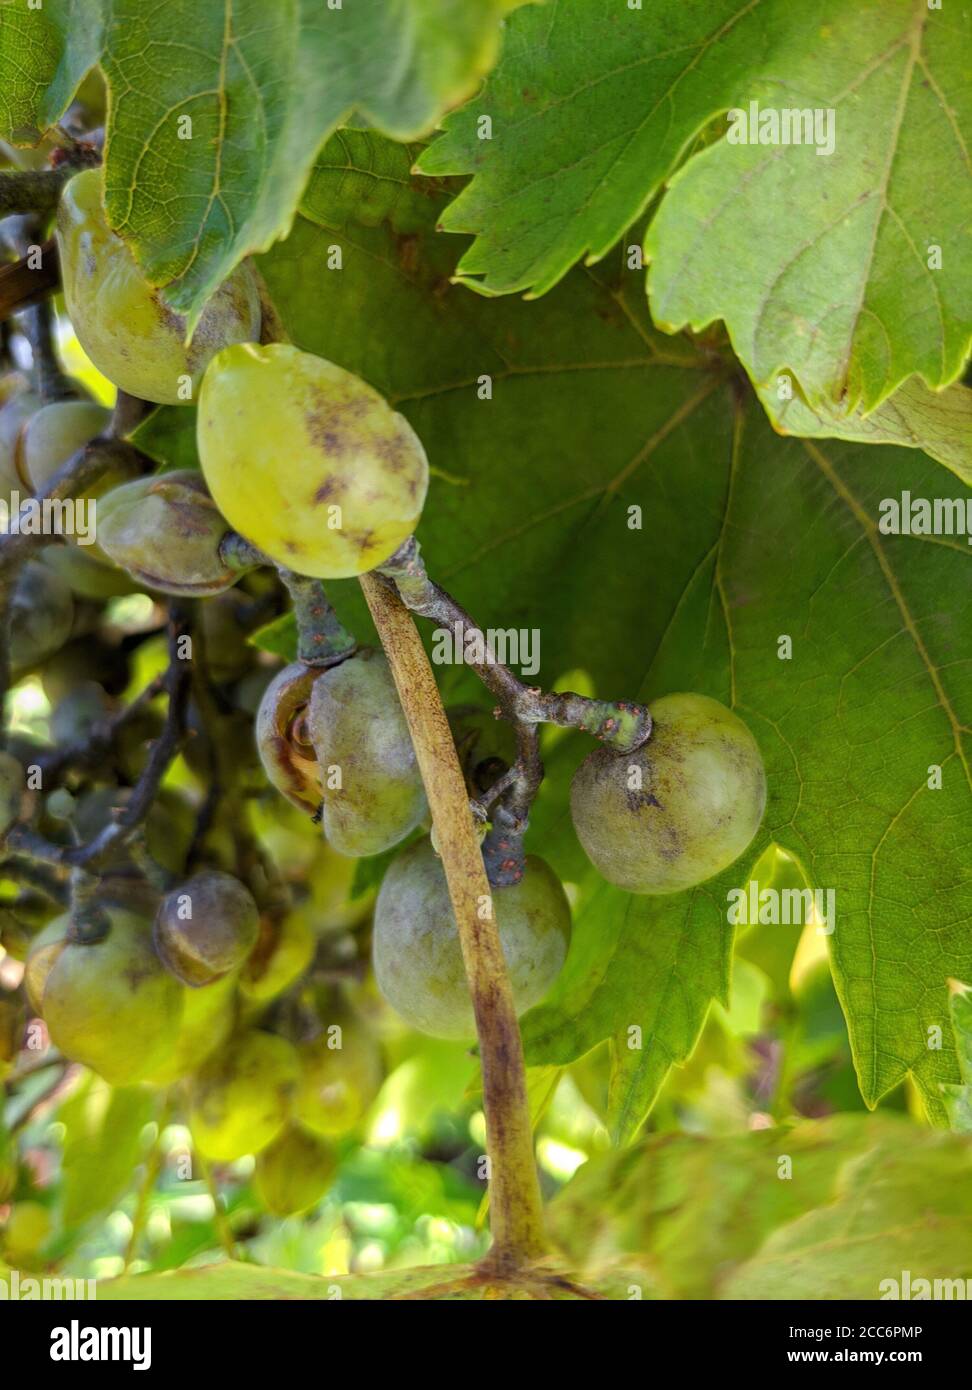 Grape disease plaque on bunch of grapes Stock Photo